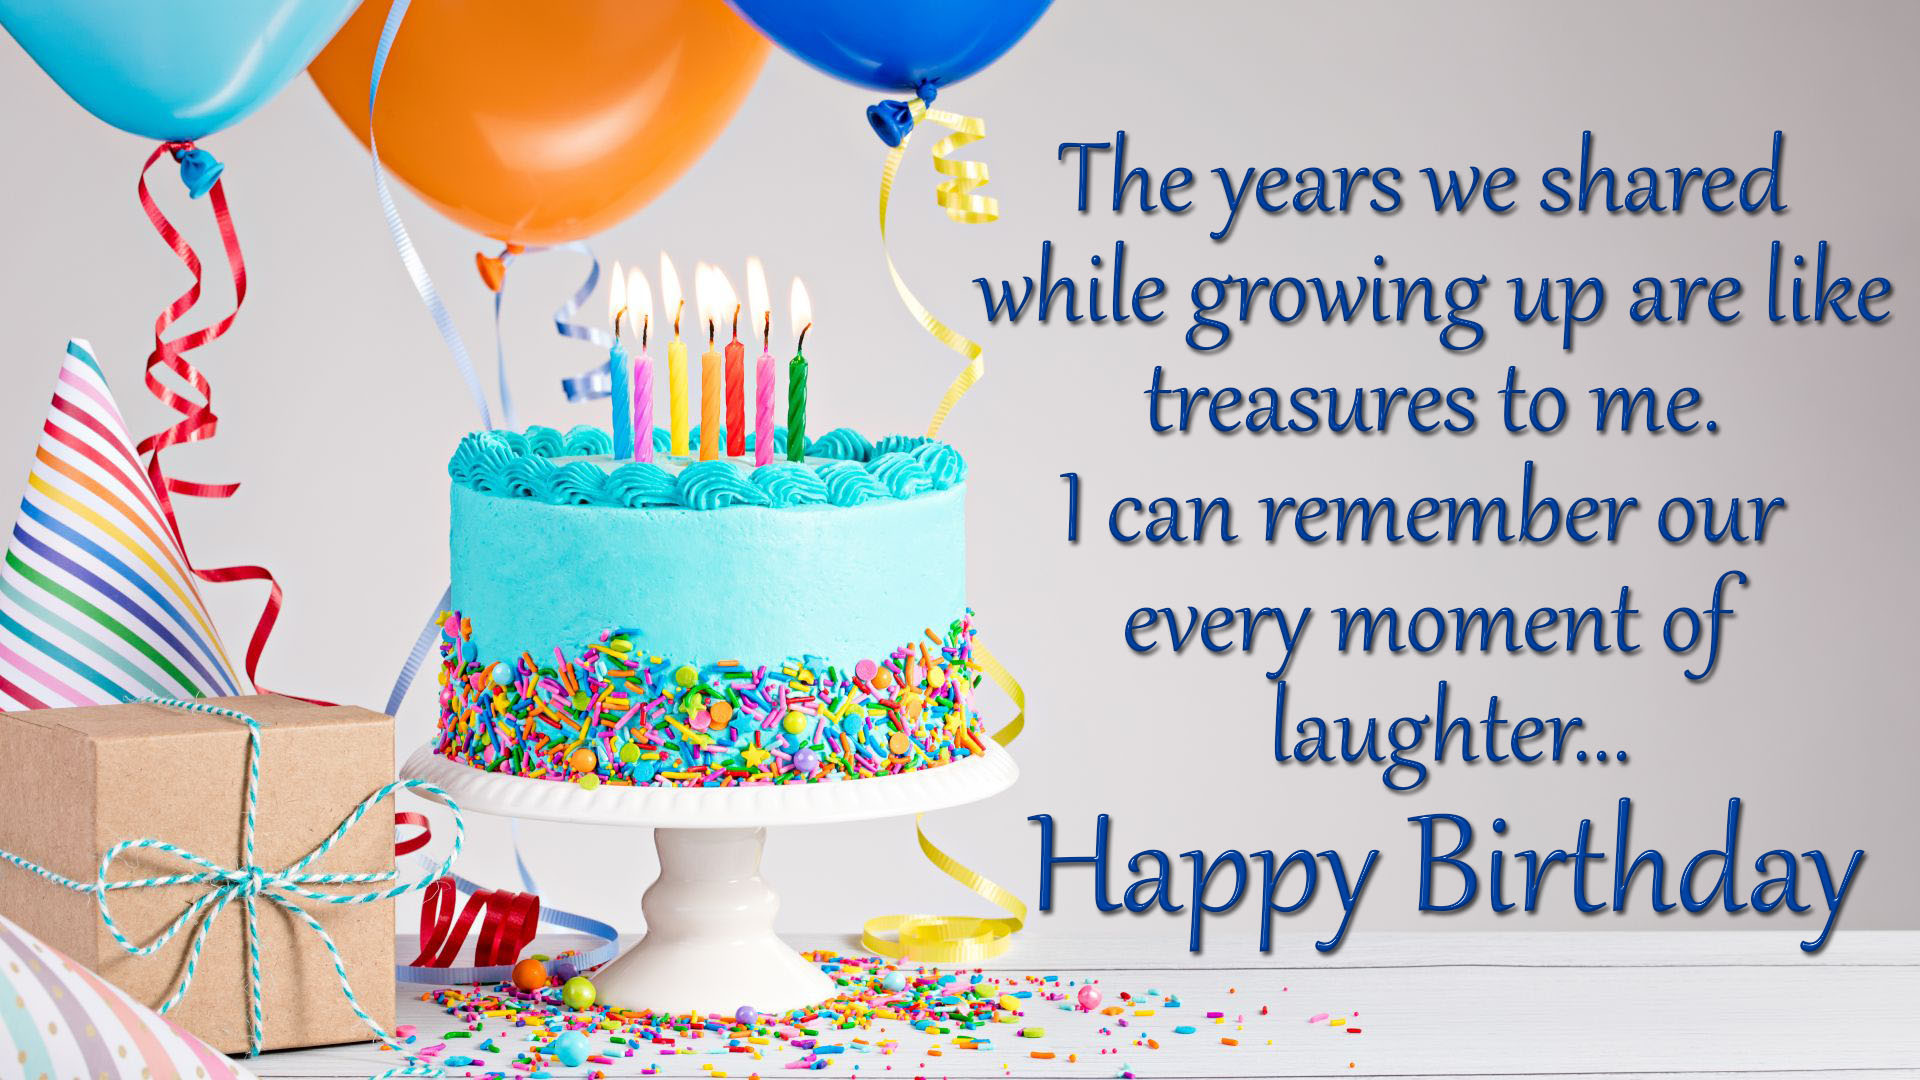 birthday message for friend hd image